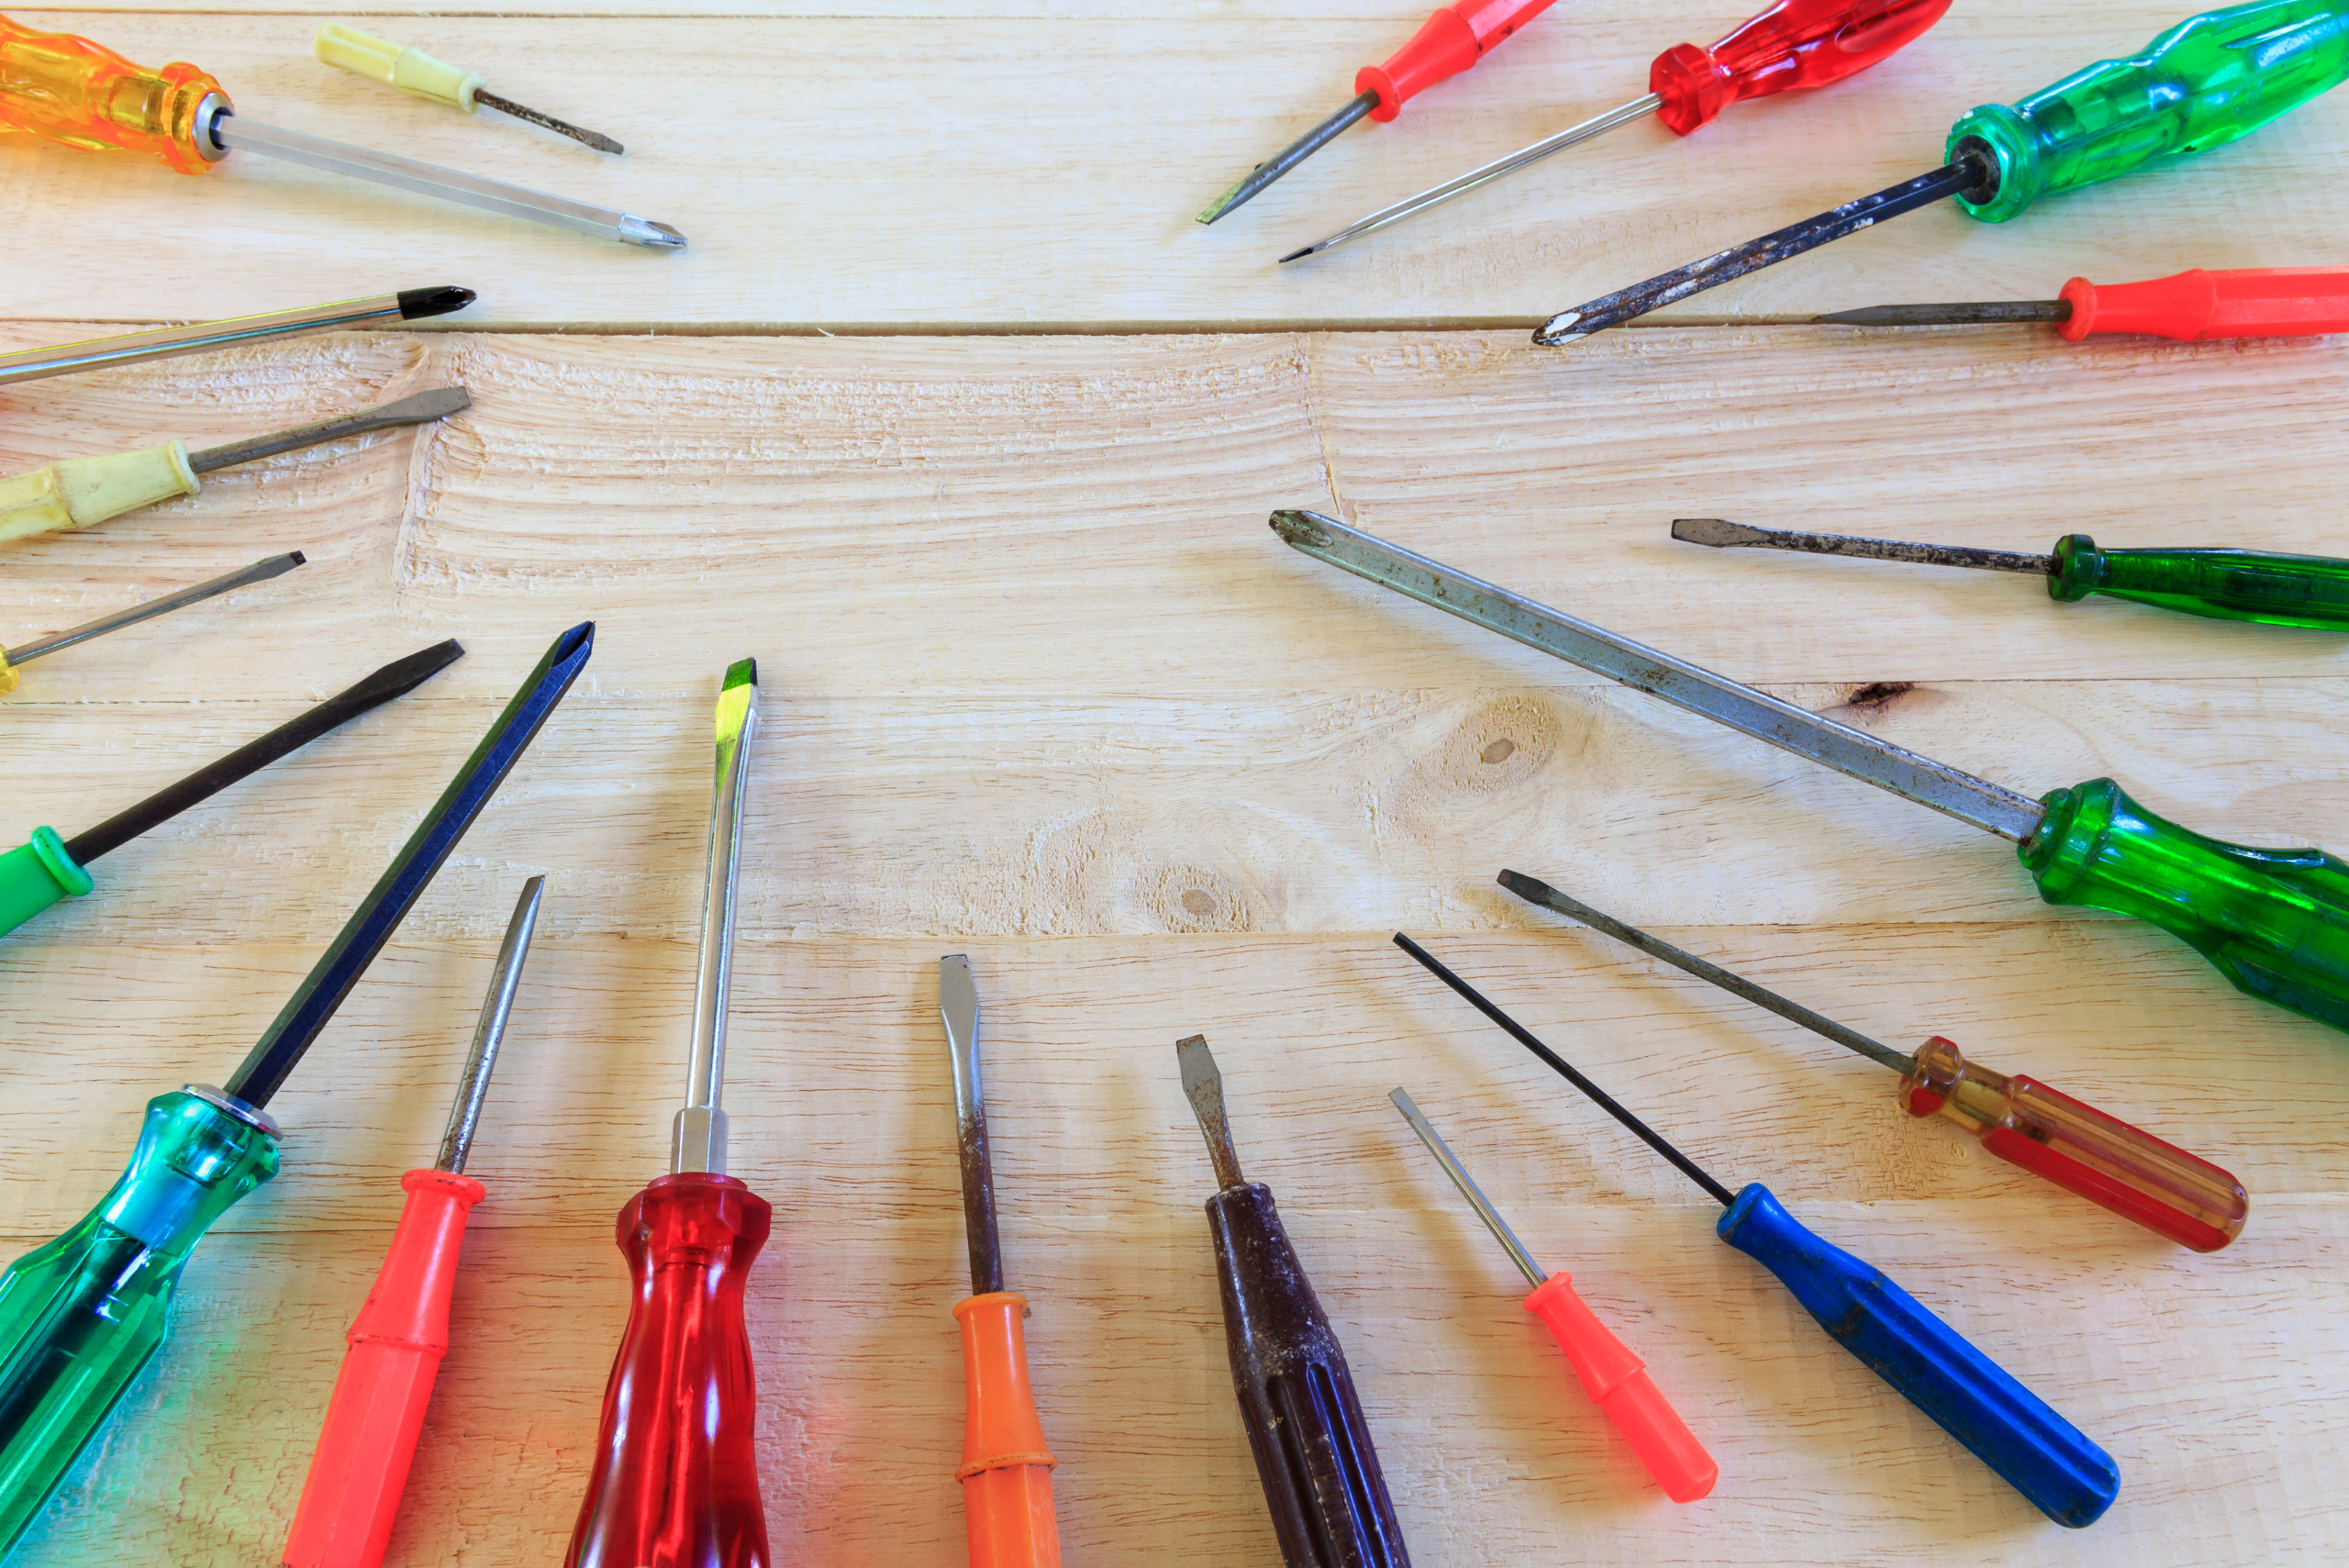 Different Types of Screwdrivers for Every DIY Project